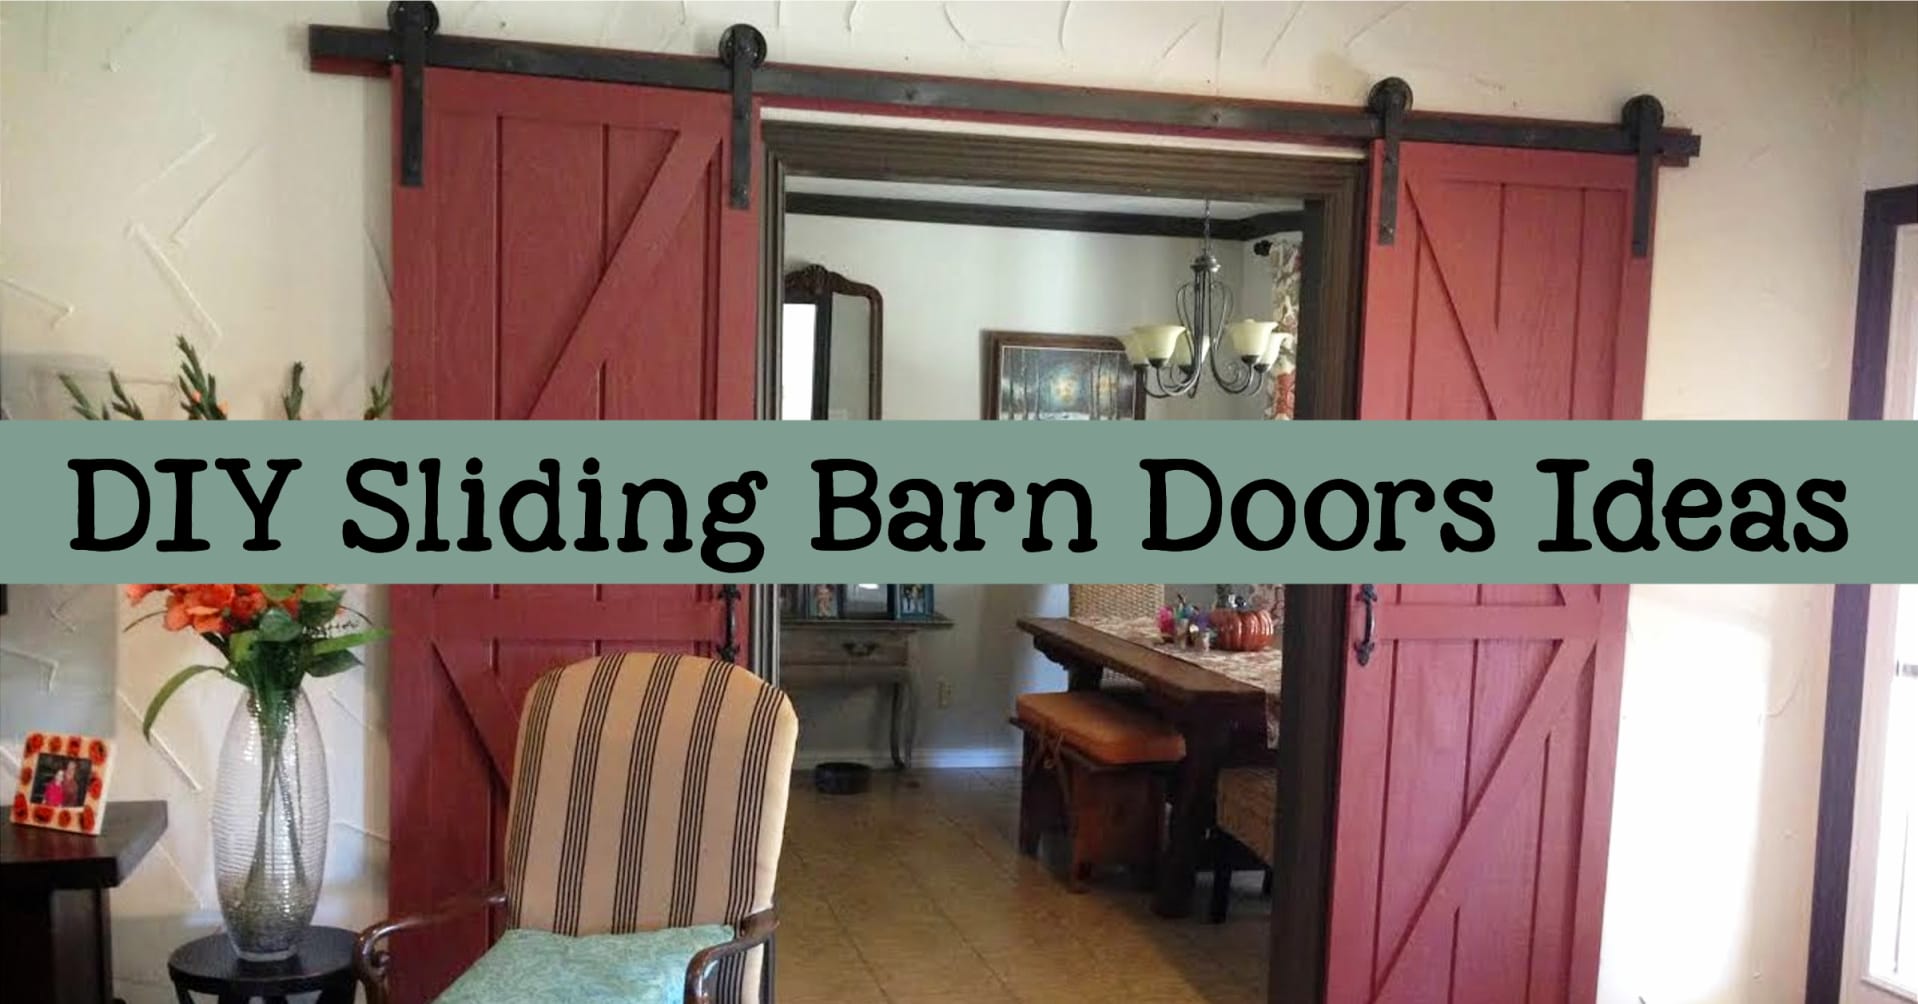 Sliding Barn Doors - DIY interior sliding barn doors and double sliding barn doors pictures in houses.  Elegant, rustic and farmhouse style double barn doors for bathrooms, bedrooms, kitchens, living rooms, master bath, basements, closets, mud rooms, pantries and other small spaces.  Sliding barn doors DIY how to build barn doors projects and sliding barn doors for sale - also sliding barn door installation tips